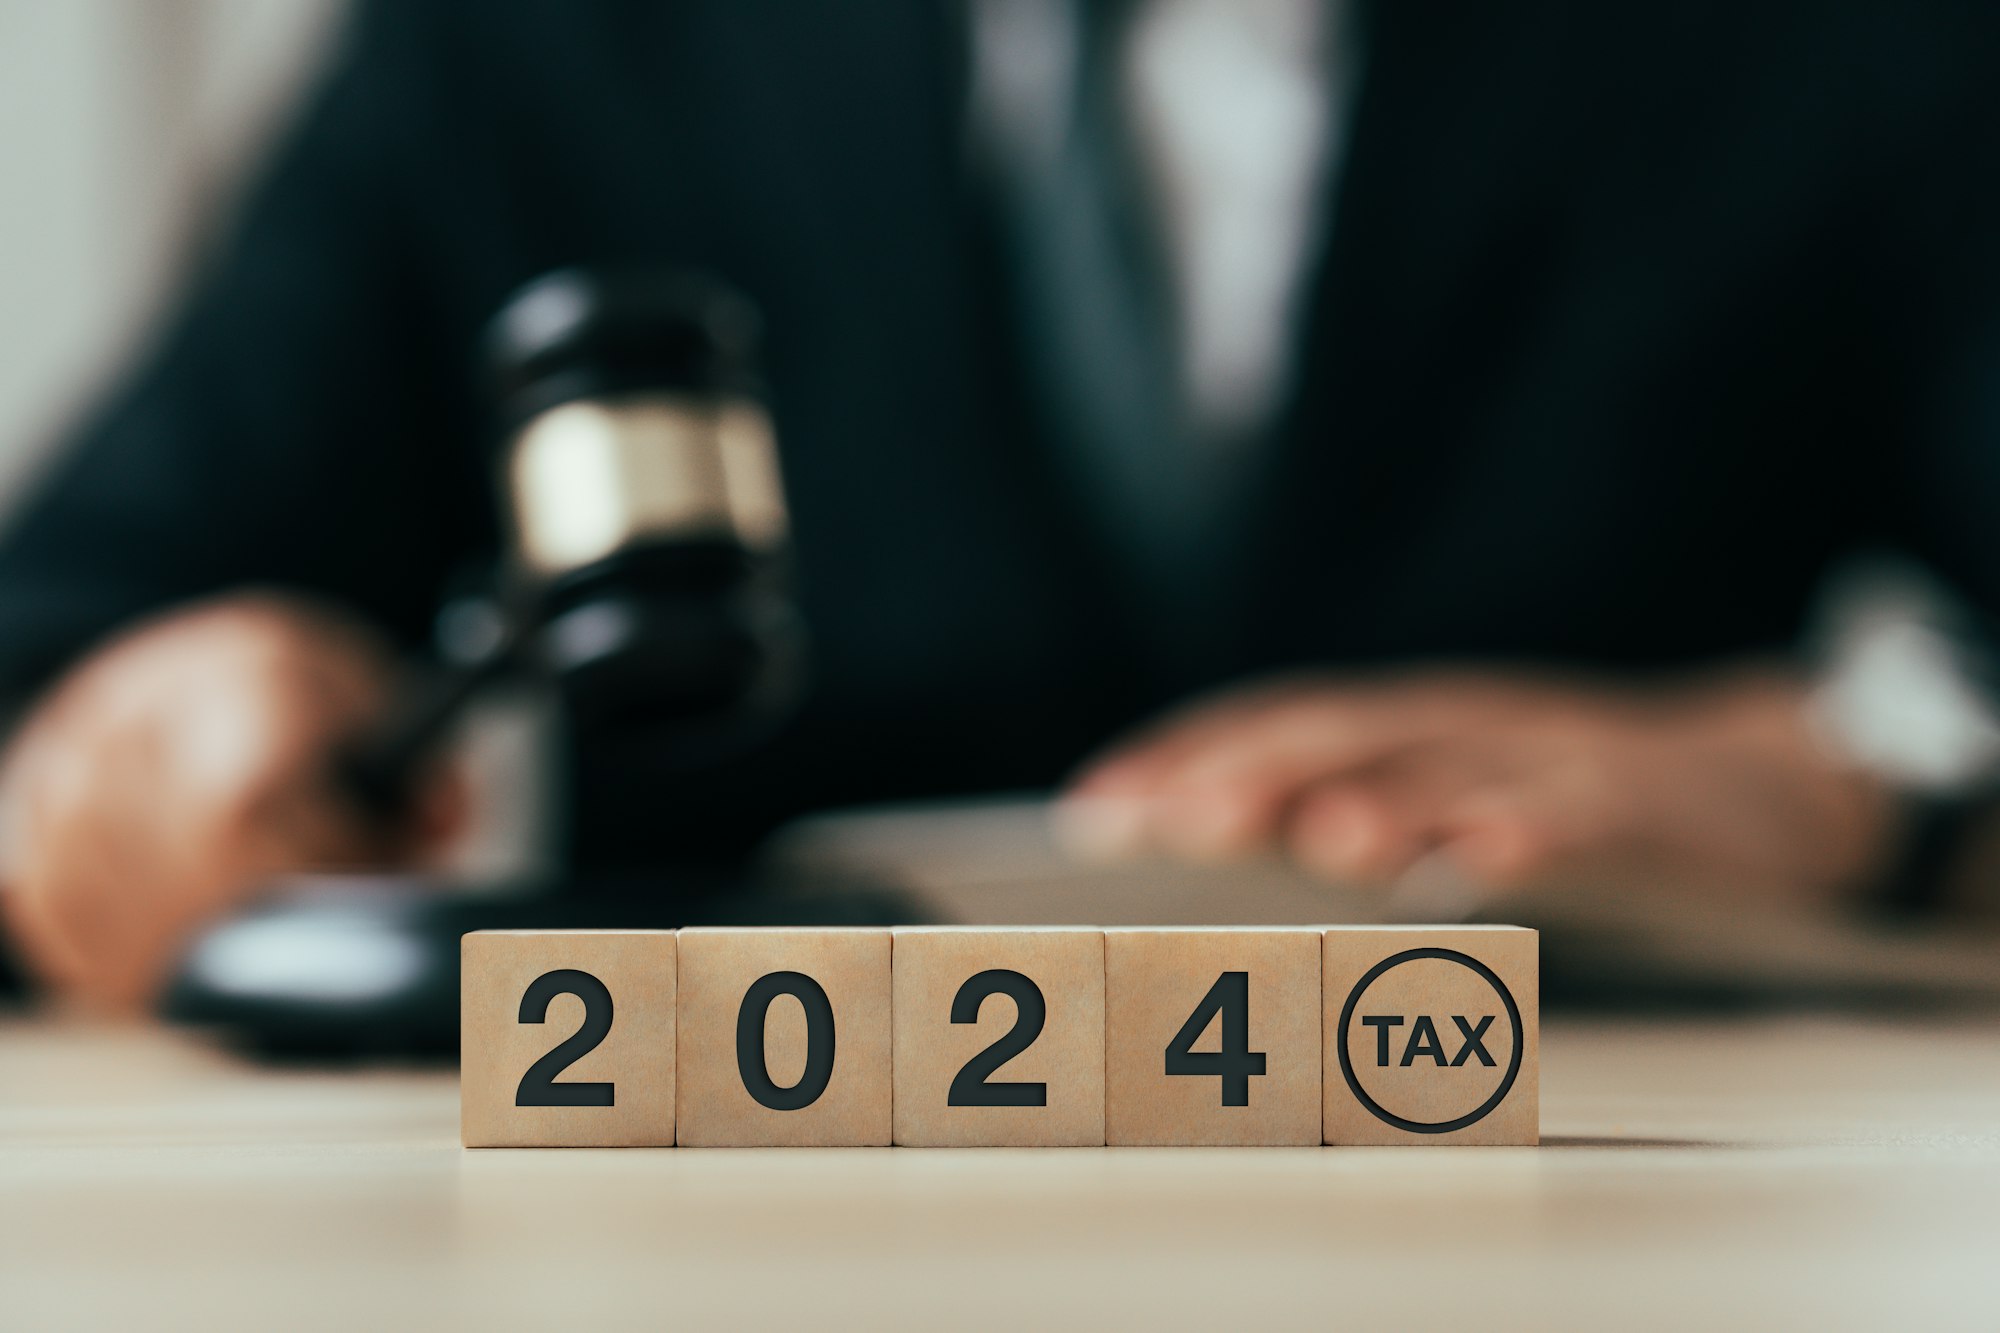 Tax 2024 on wooden blocks. Business and tax concept. Financial calculation, tax, accounting